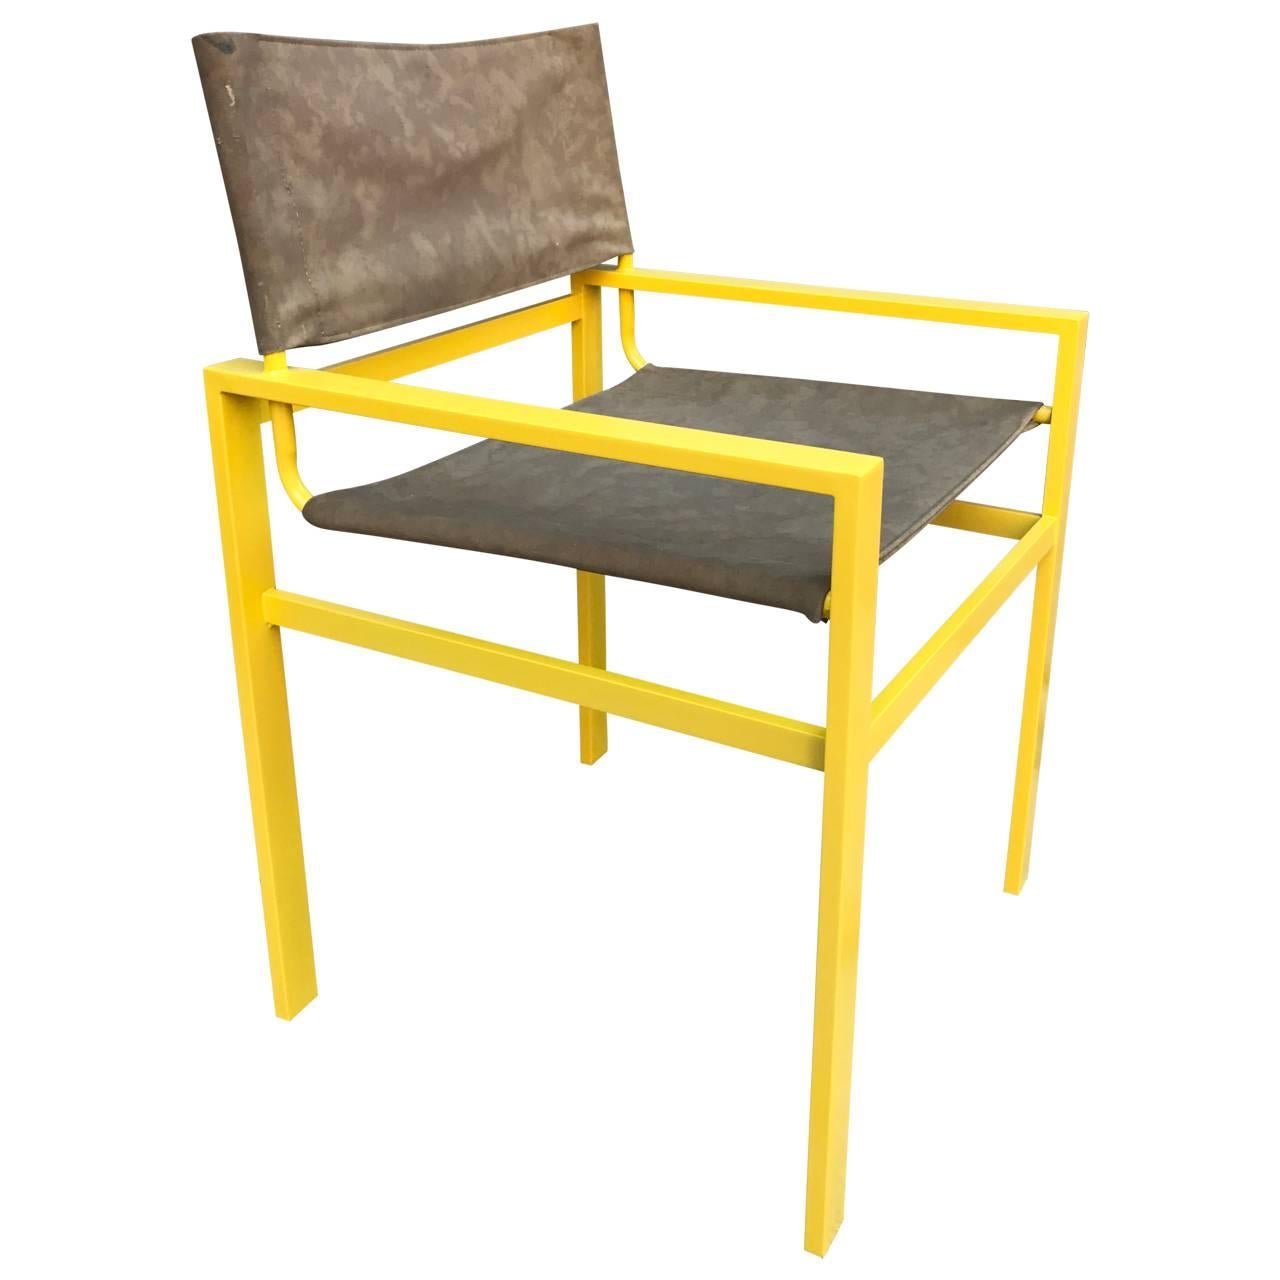 Mid-Century Modern Powder-coated bright yellow armchair with light brown faux suede upholstery.
This classic and sturdy armchair has been updated with bright yellow powder coated frame. The faux suede upholstery is new and very comfortable. In any